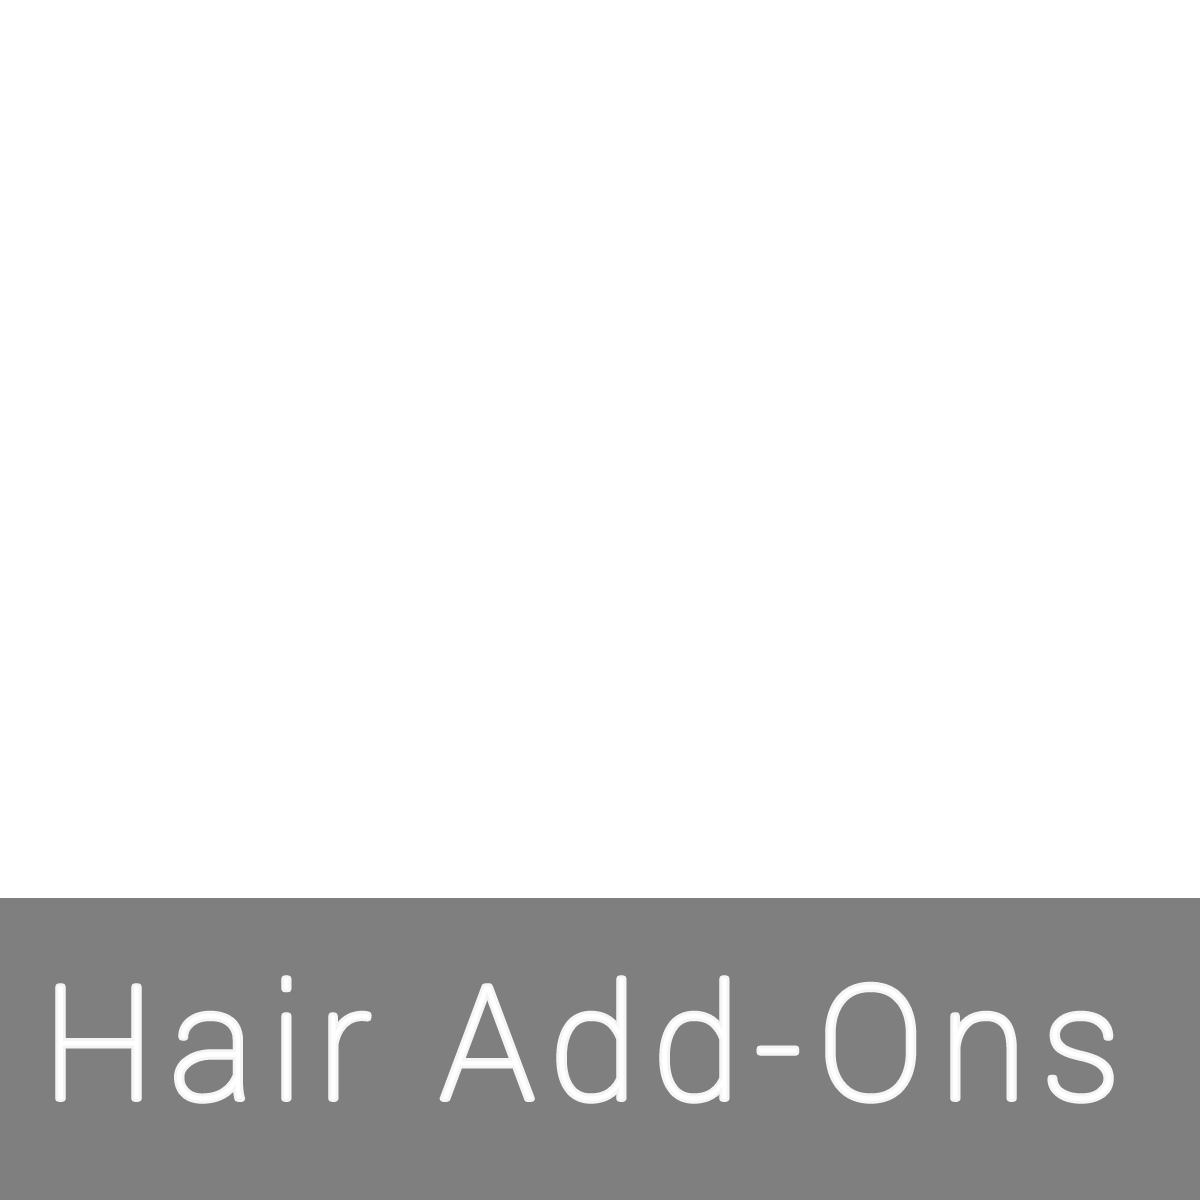 voga-wigs-and-hair-add-ons-products-page-box-link-hair-add-ons